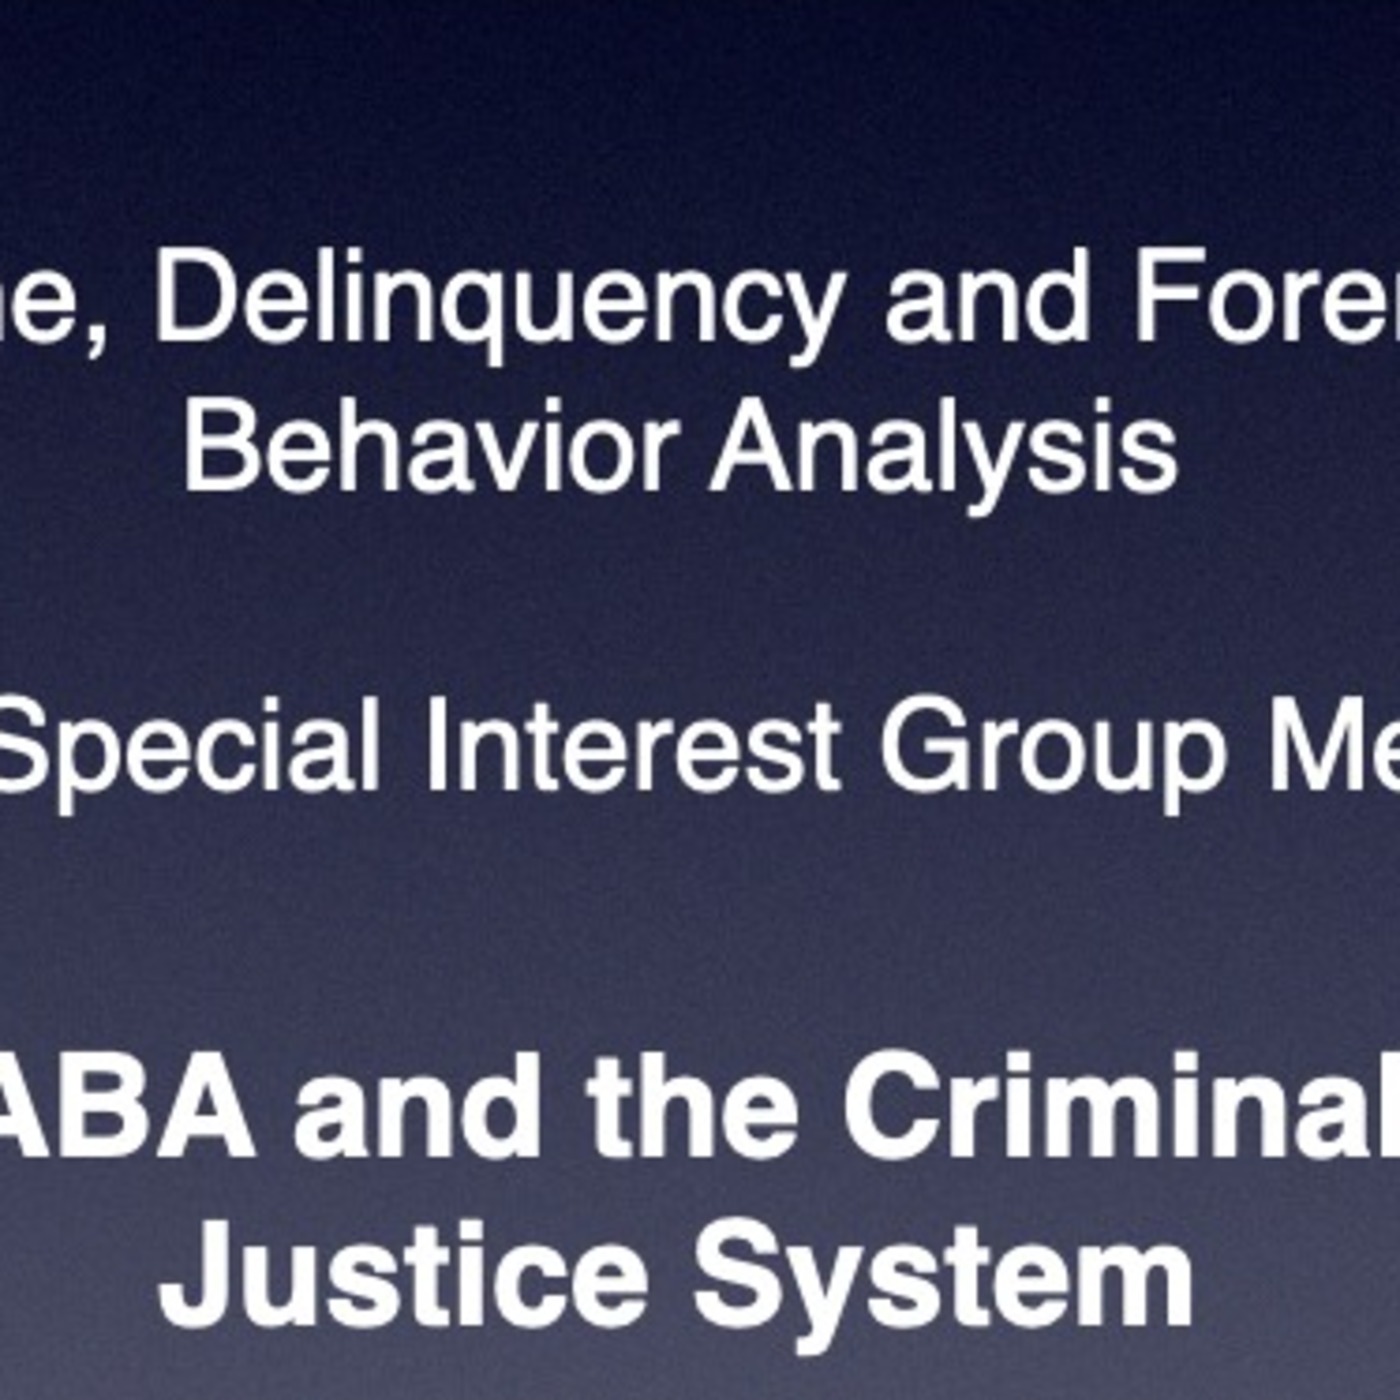 Episode 38: CDFBA SIG Meeting: ABA and the Criminal Justice System